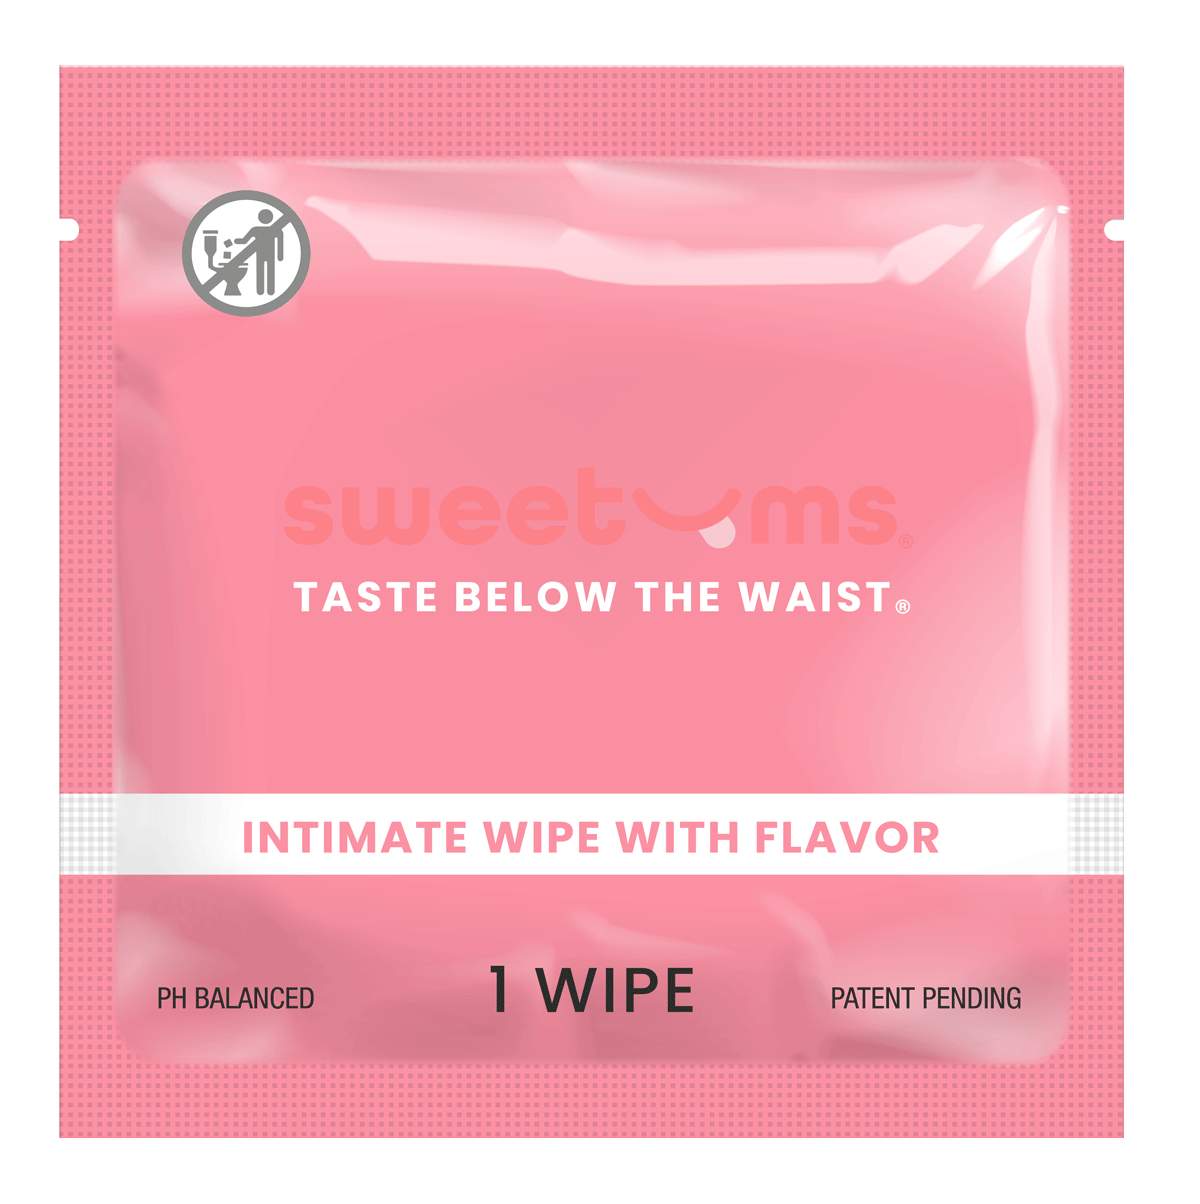 Sweetums Flavored Wipes for women - Cherry Flavor